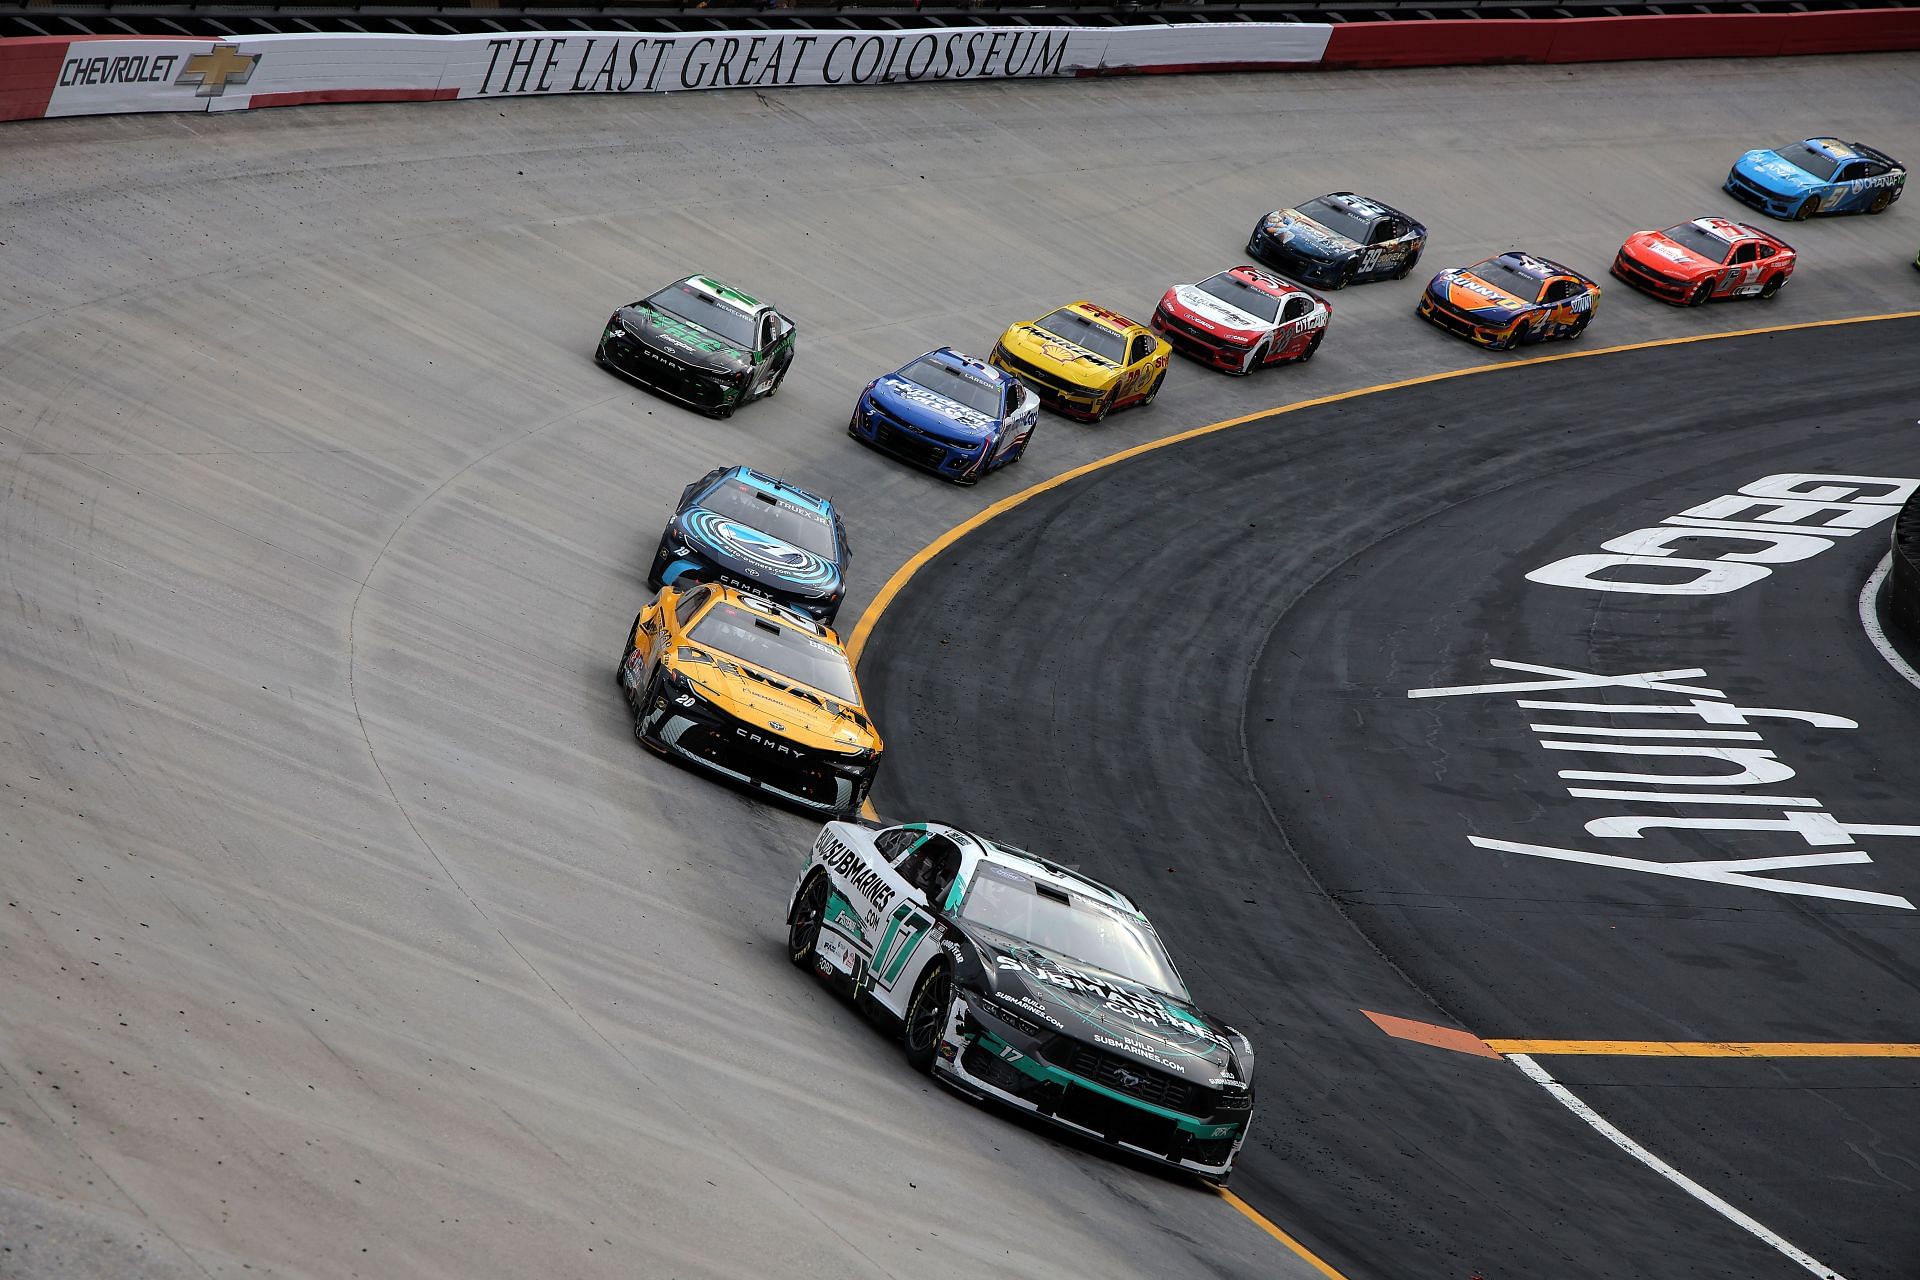 3 Key takeaways from the tire intensive NASCAR Bristol Cup race, beyond